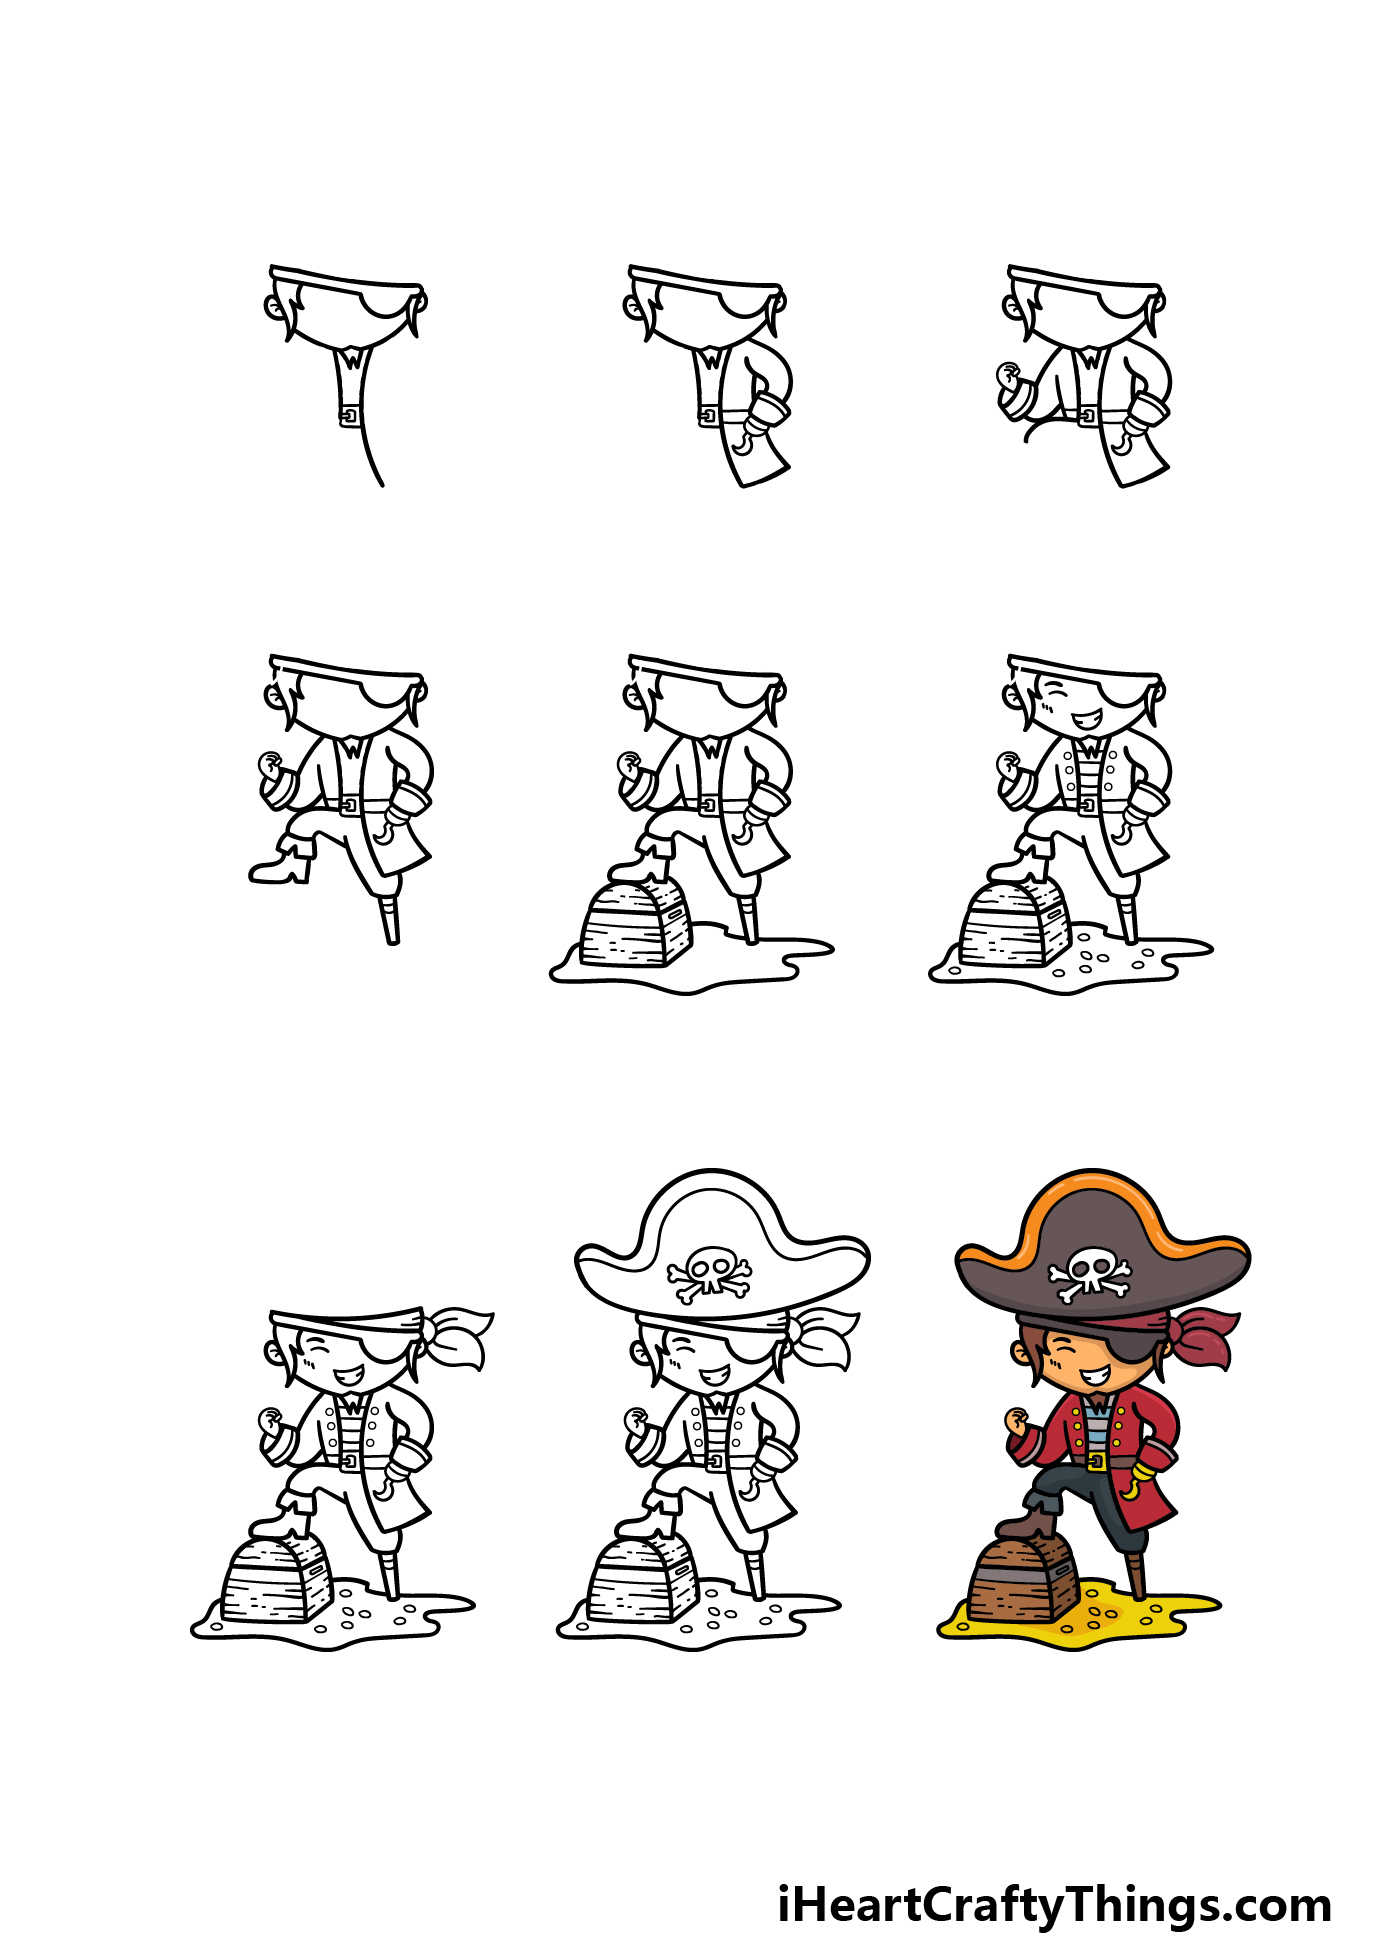 how to draw a cartoon pirate in 9 steps